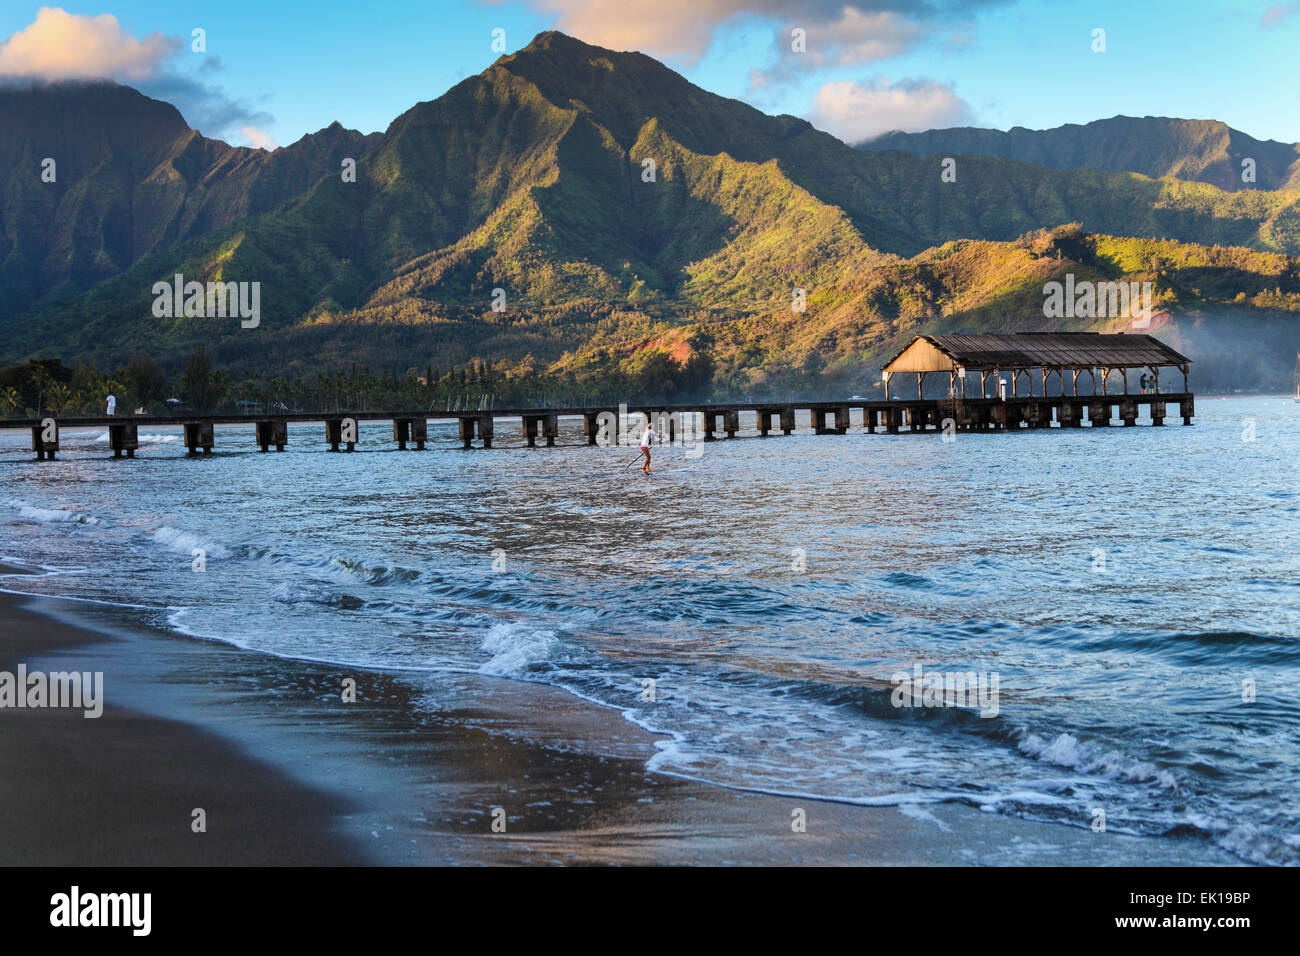 Stand up paddle boarder by Hanalei Pier at dawn Stock Photo